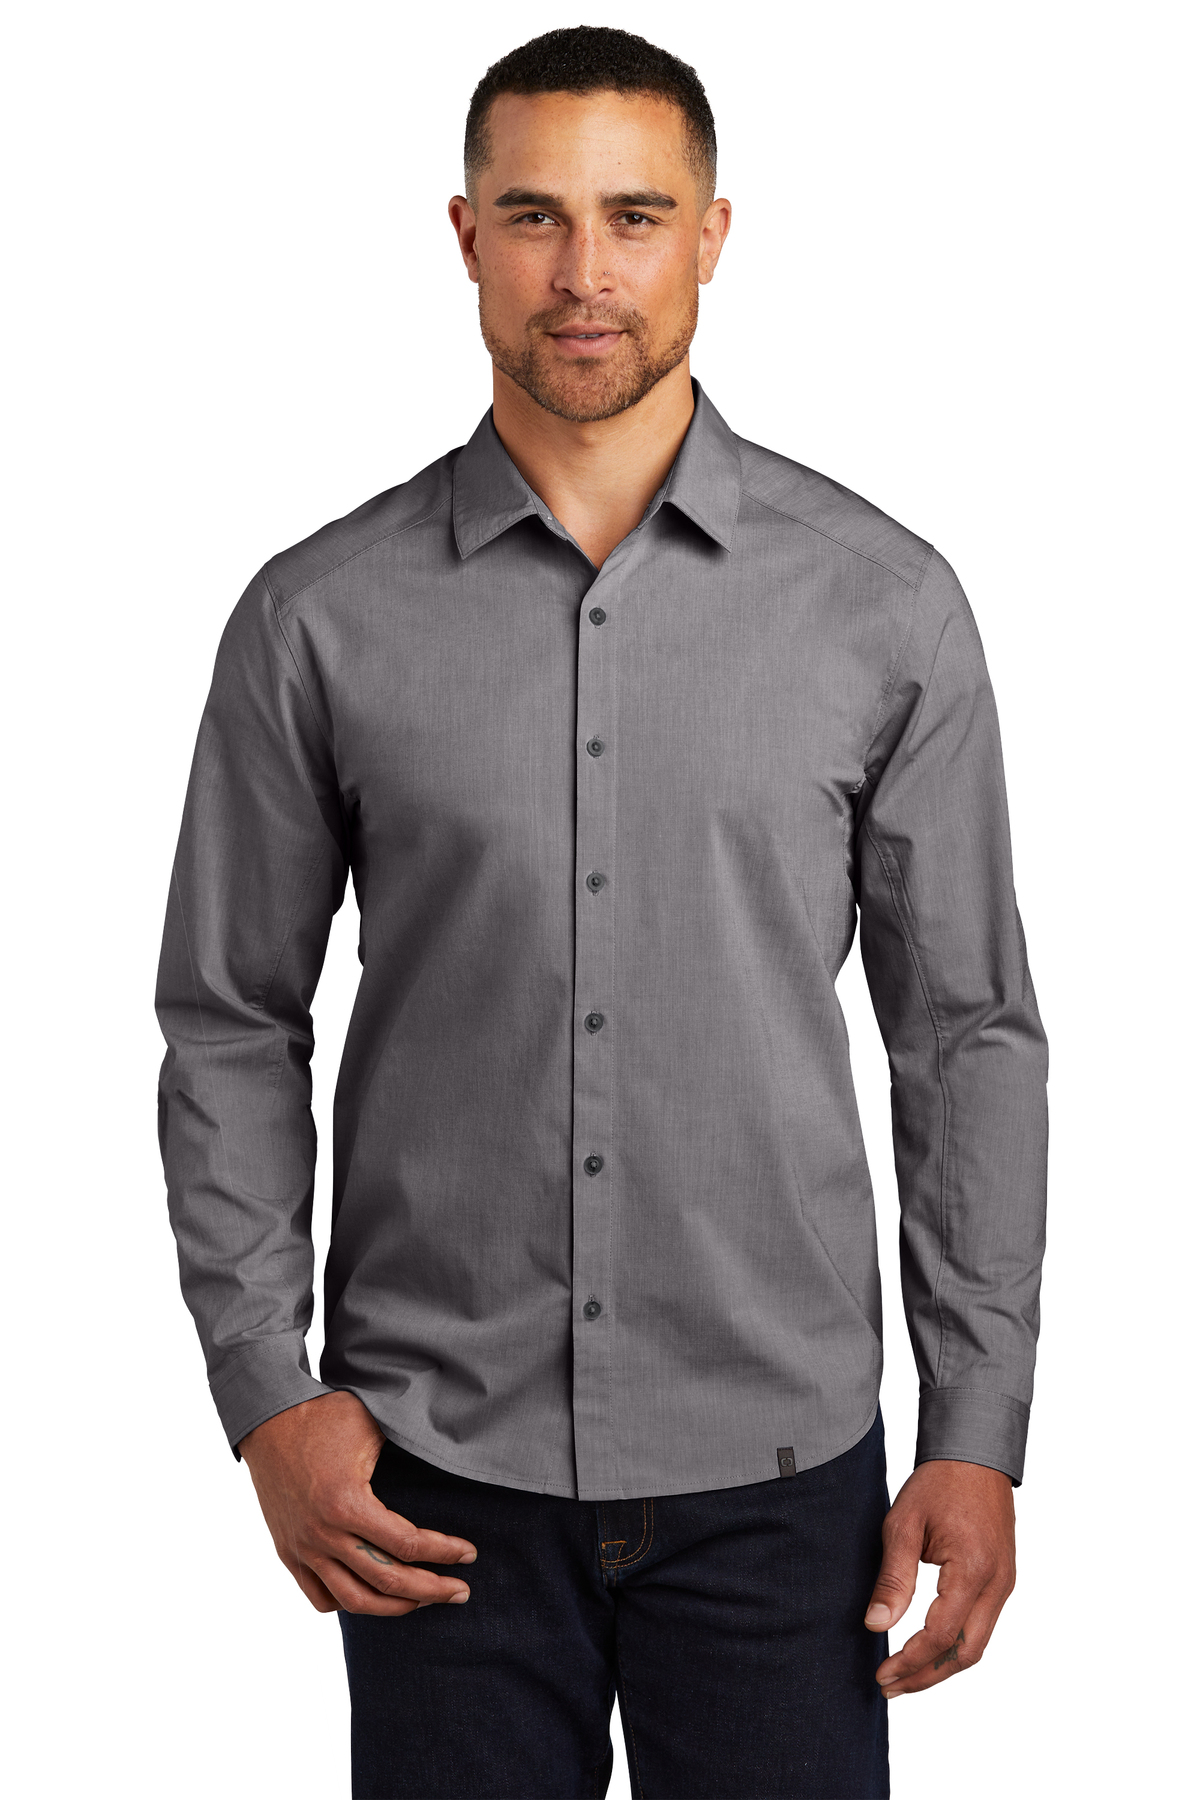 OGIO Embroidered Men's Commuter Woven Shirt - Queensboro